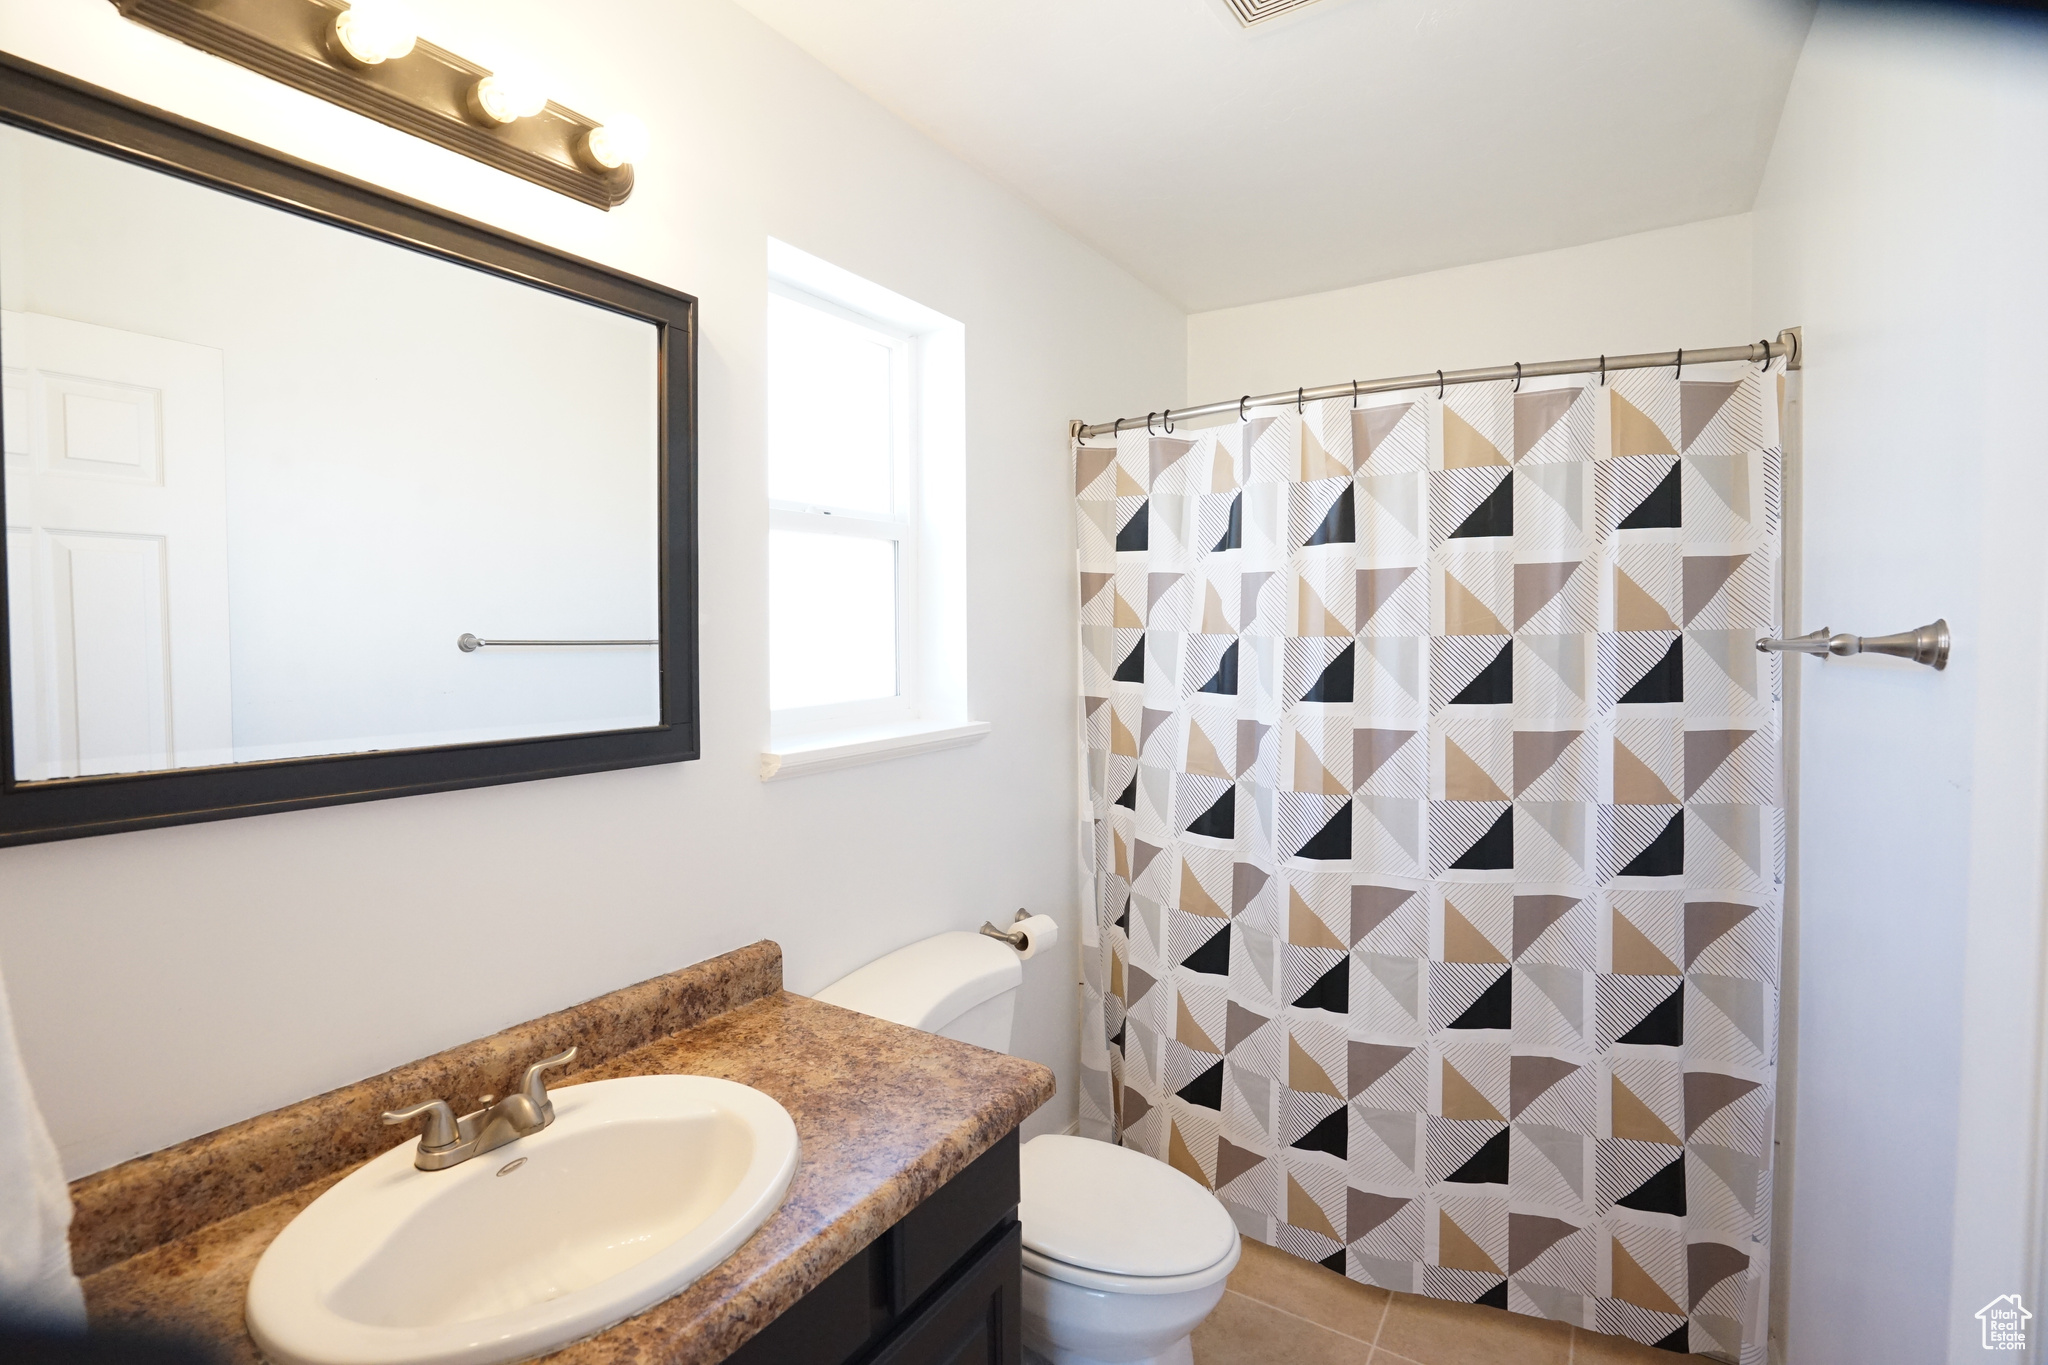 Bathroom featuring vanity with extensive cabinet space, toilet, and tile floors